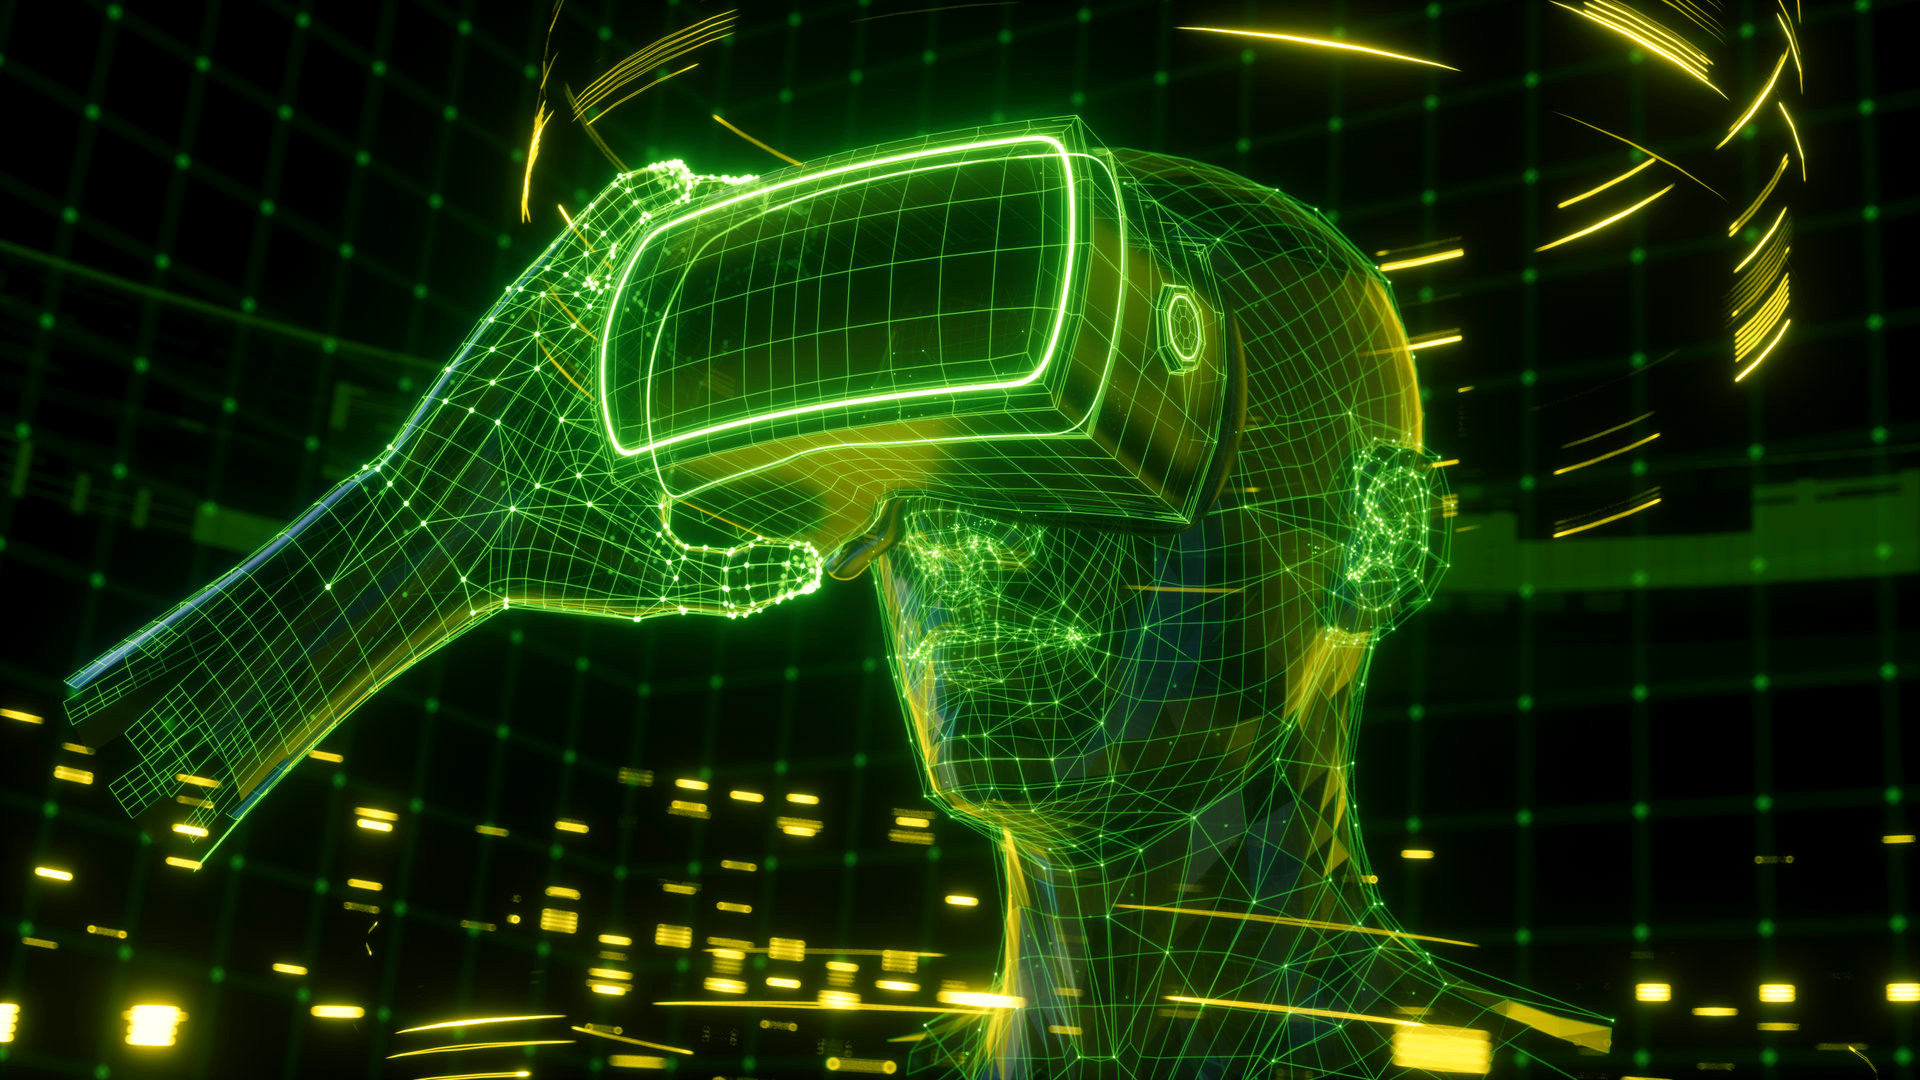 3D render, visualization of a man holding virtual reality glasses, electronic device, head surrounded by virtual data with neon green grid. Player one ready for the VR game. Virtual experience.